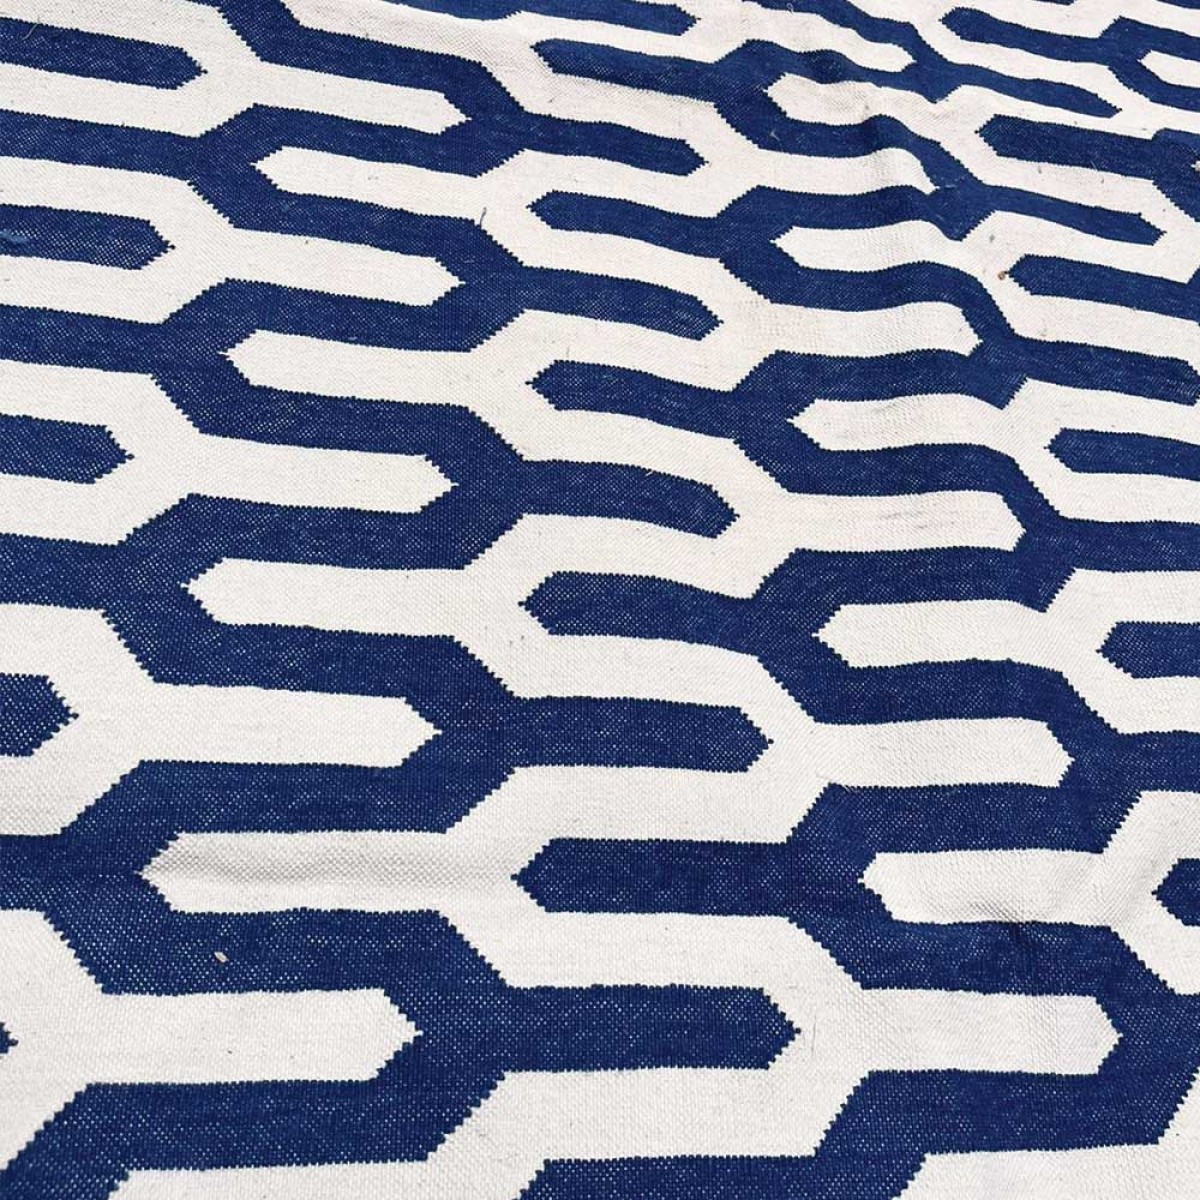 Cotton Floor Rugs - Blue and White Chain (Made to Order)